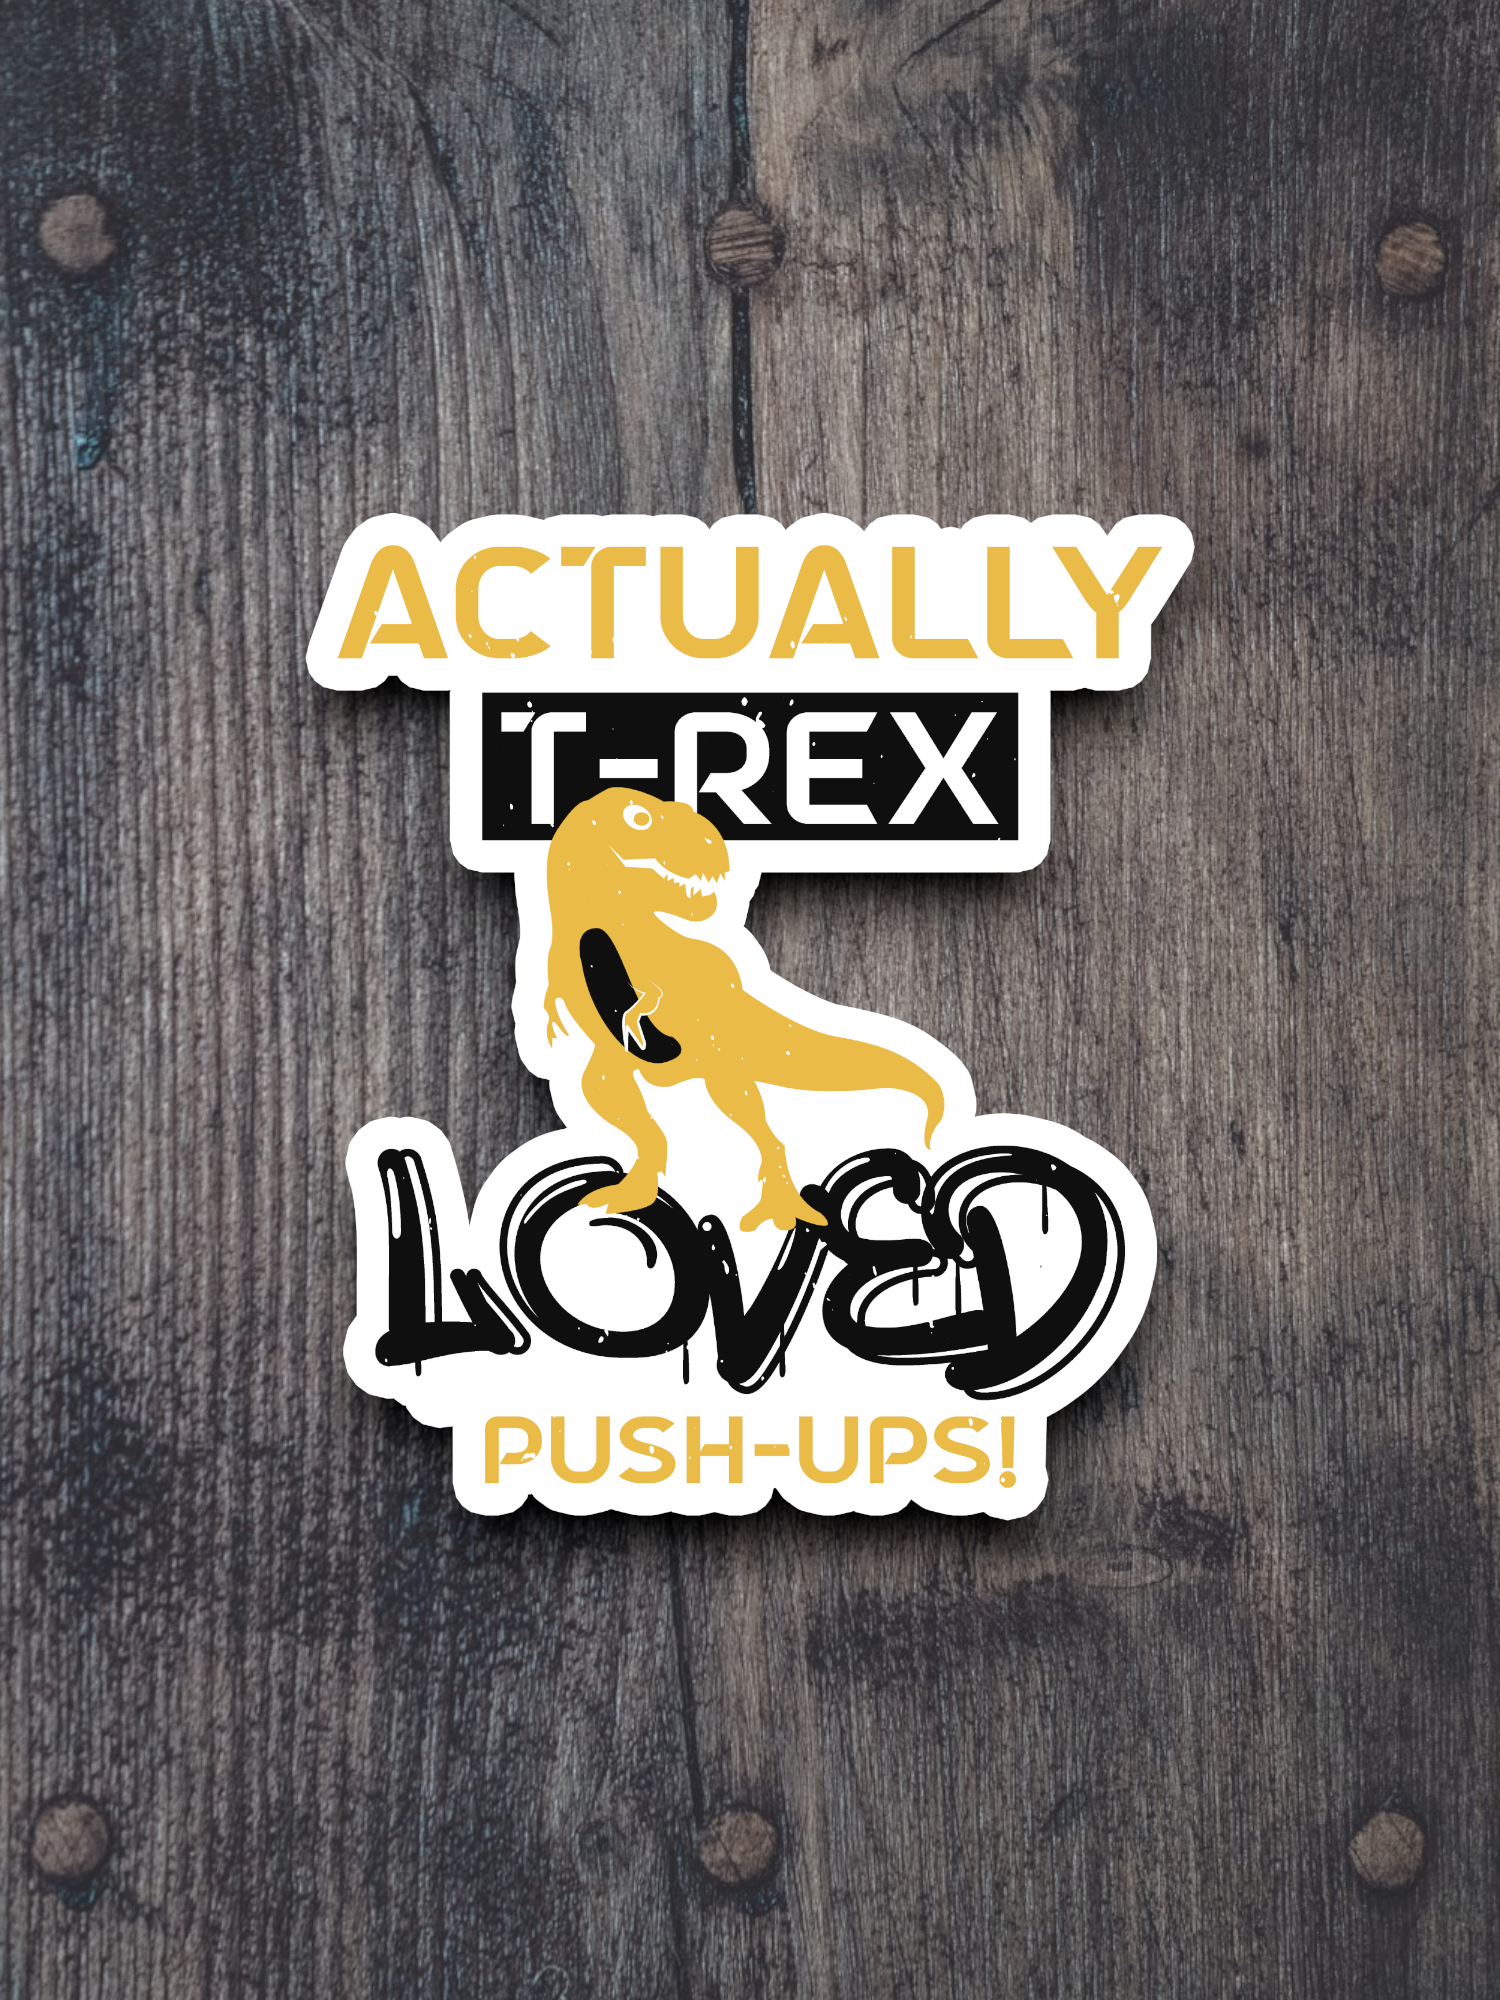 Actually T-Rex Loved Push-Ups Sticker